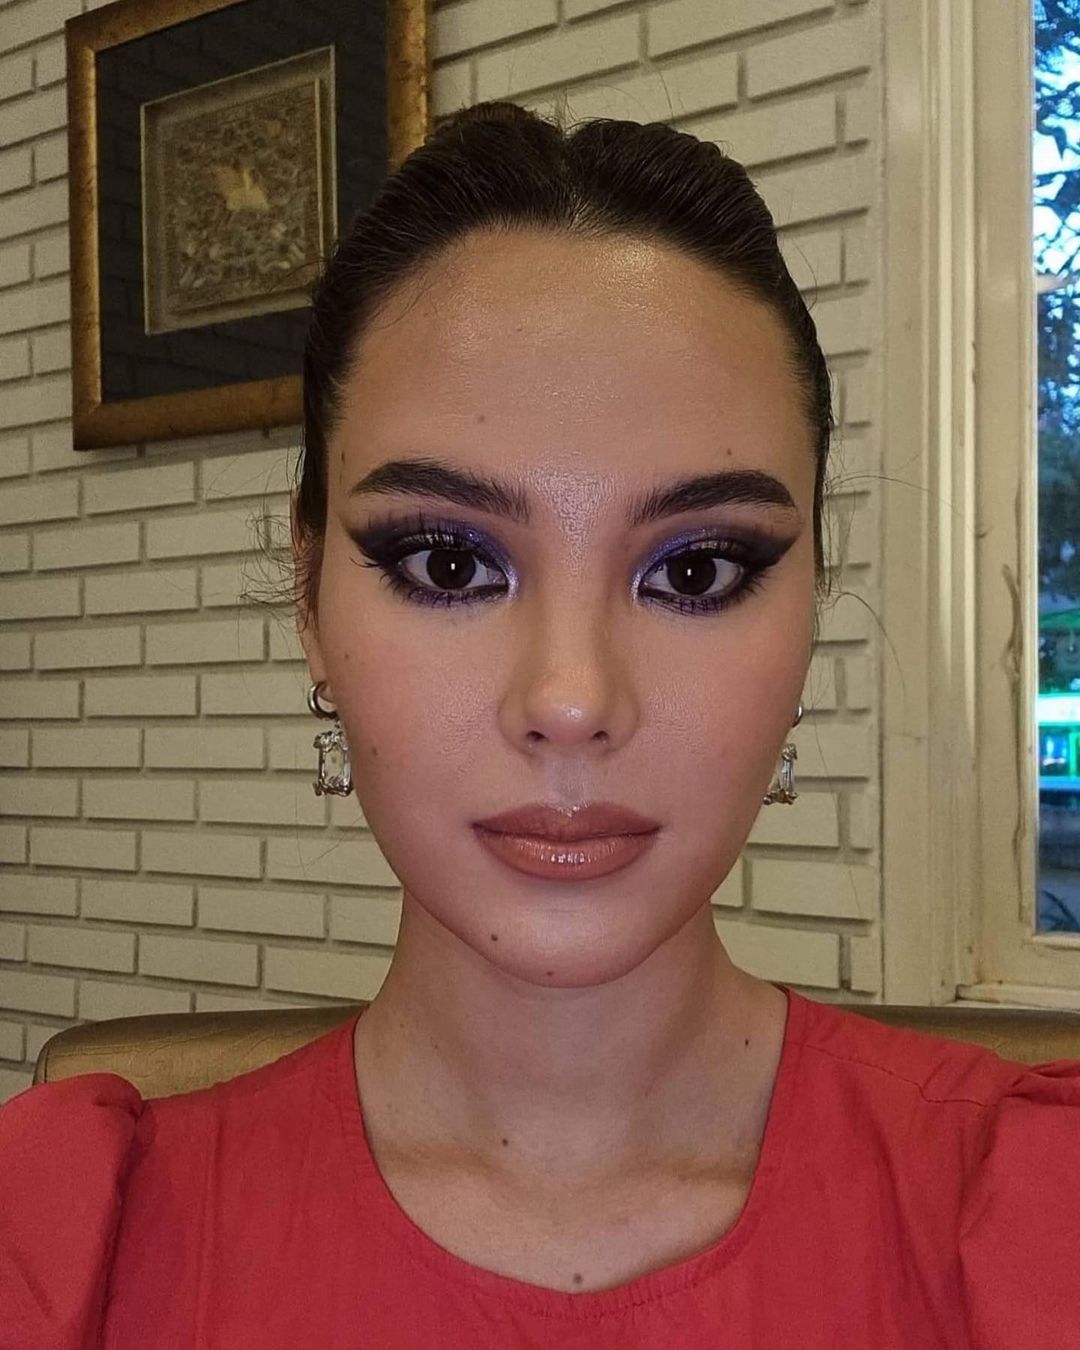 jelly eugenio and catriona gray makeup training